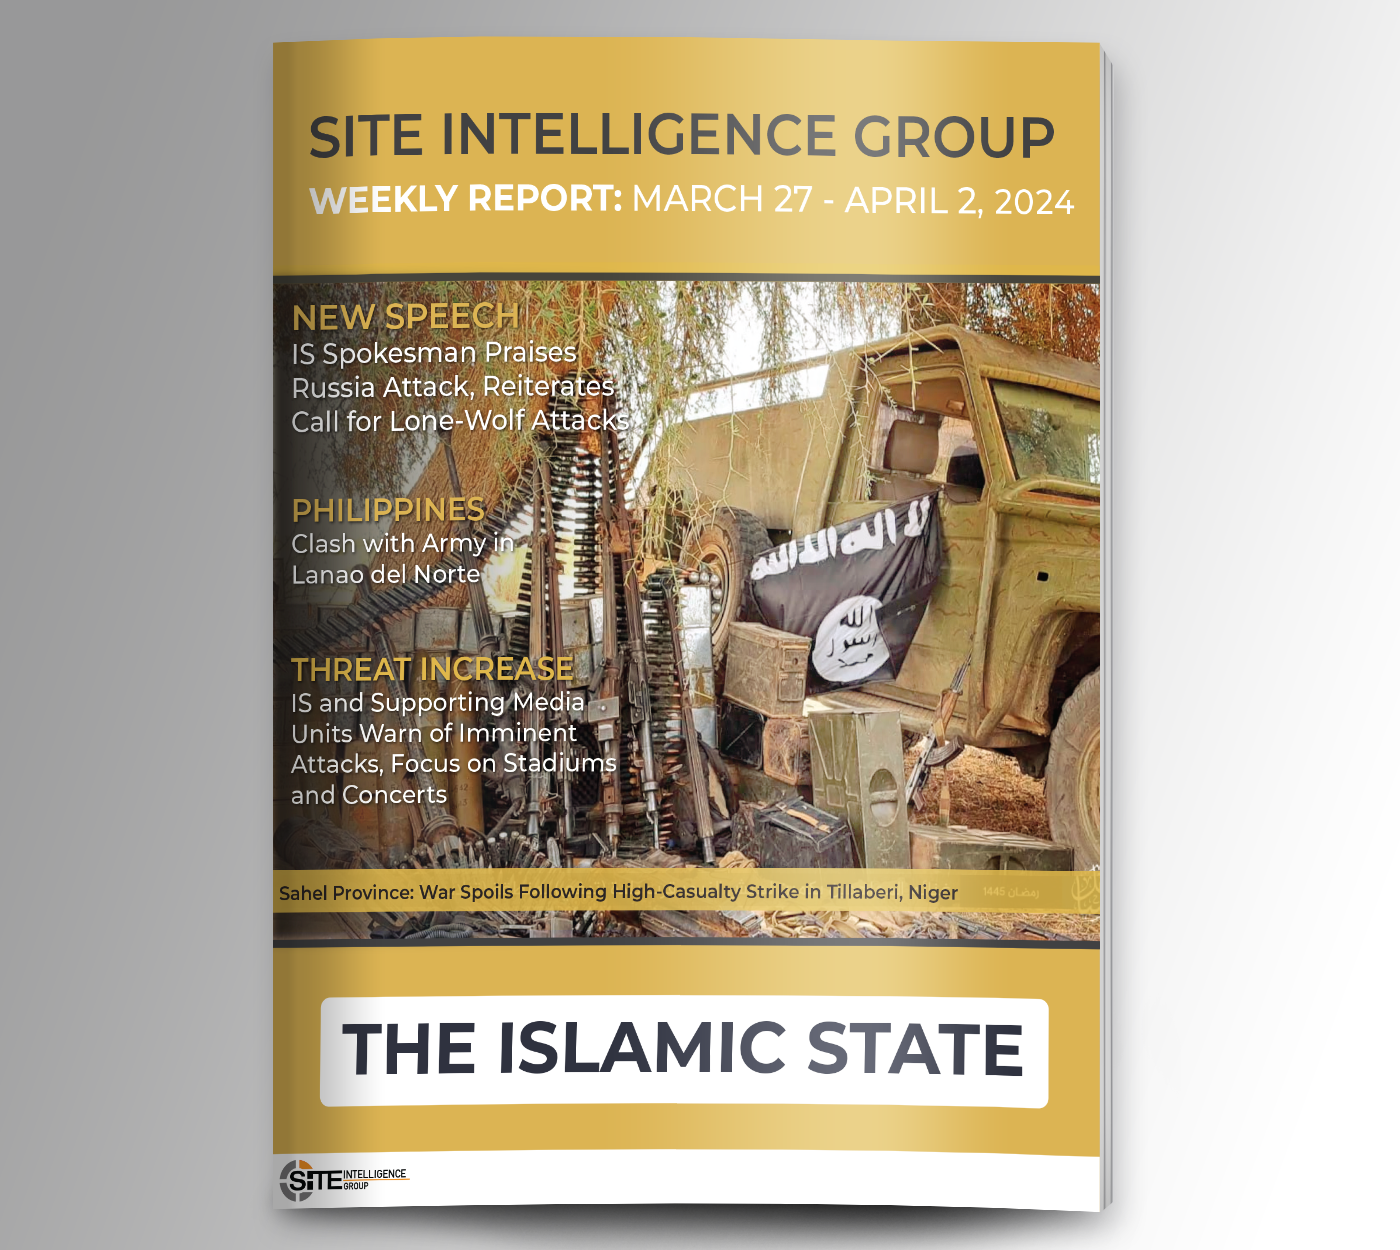 Weekly inSITE on the Islamic State for March 27-April 2, 2024